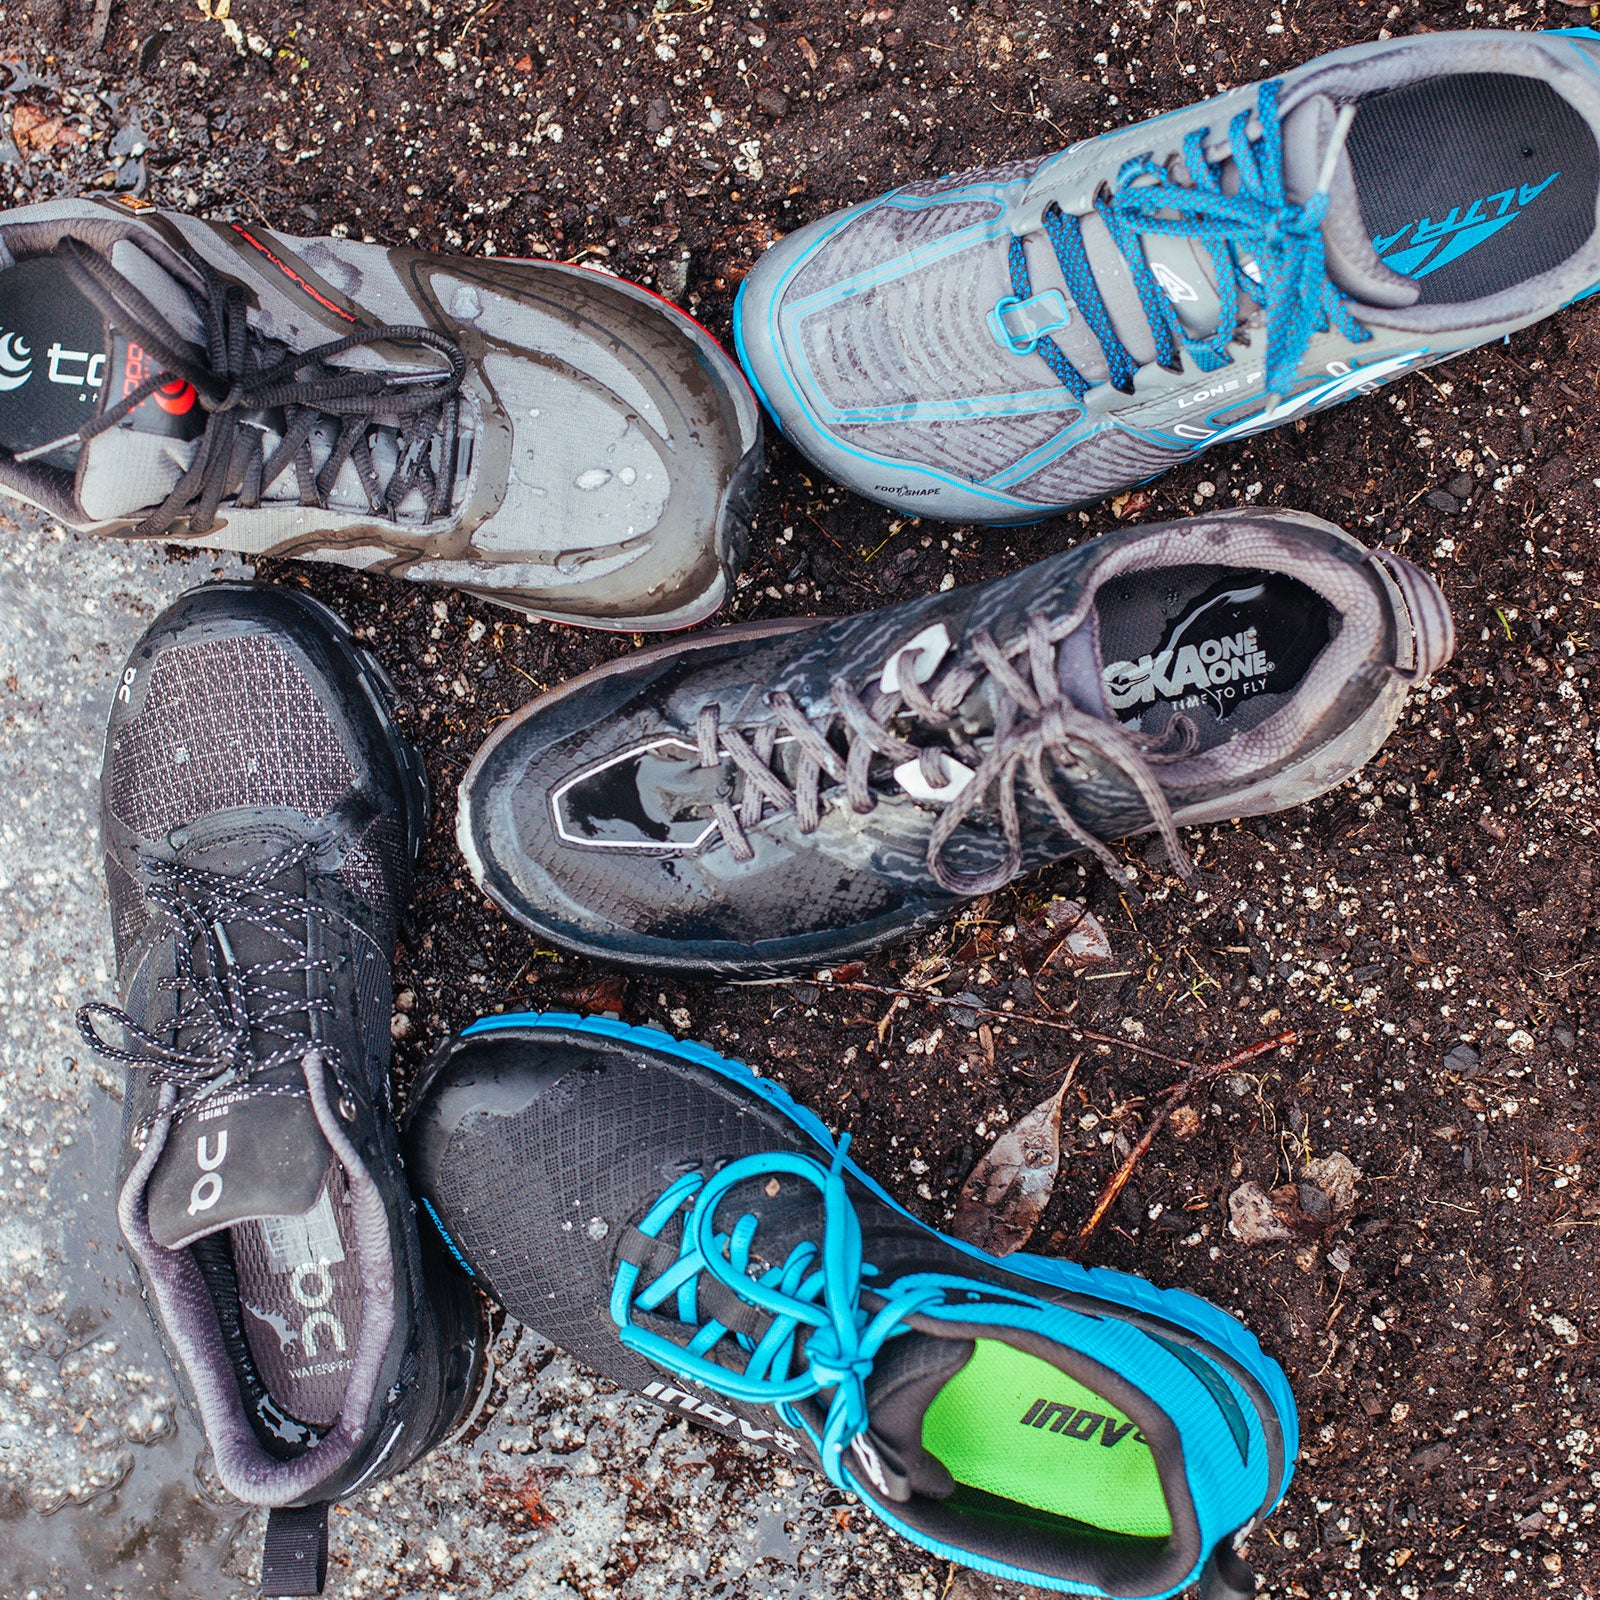 Can There Be a True Waterproof-Breathable Running Shoe?